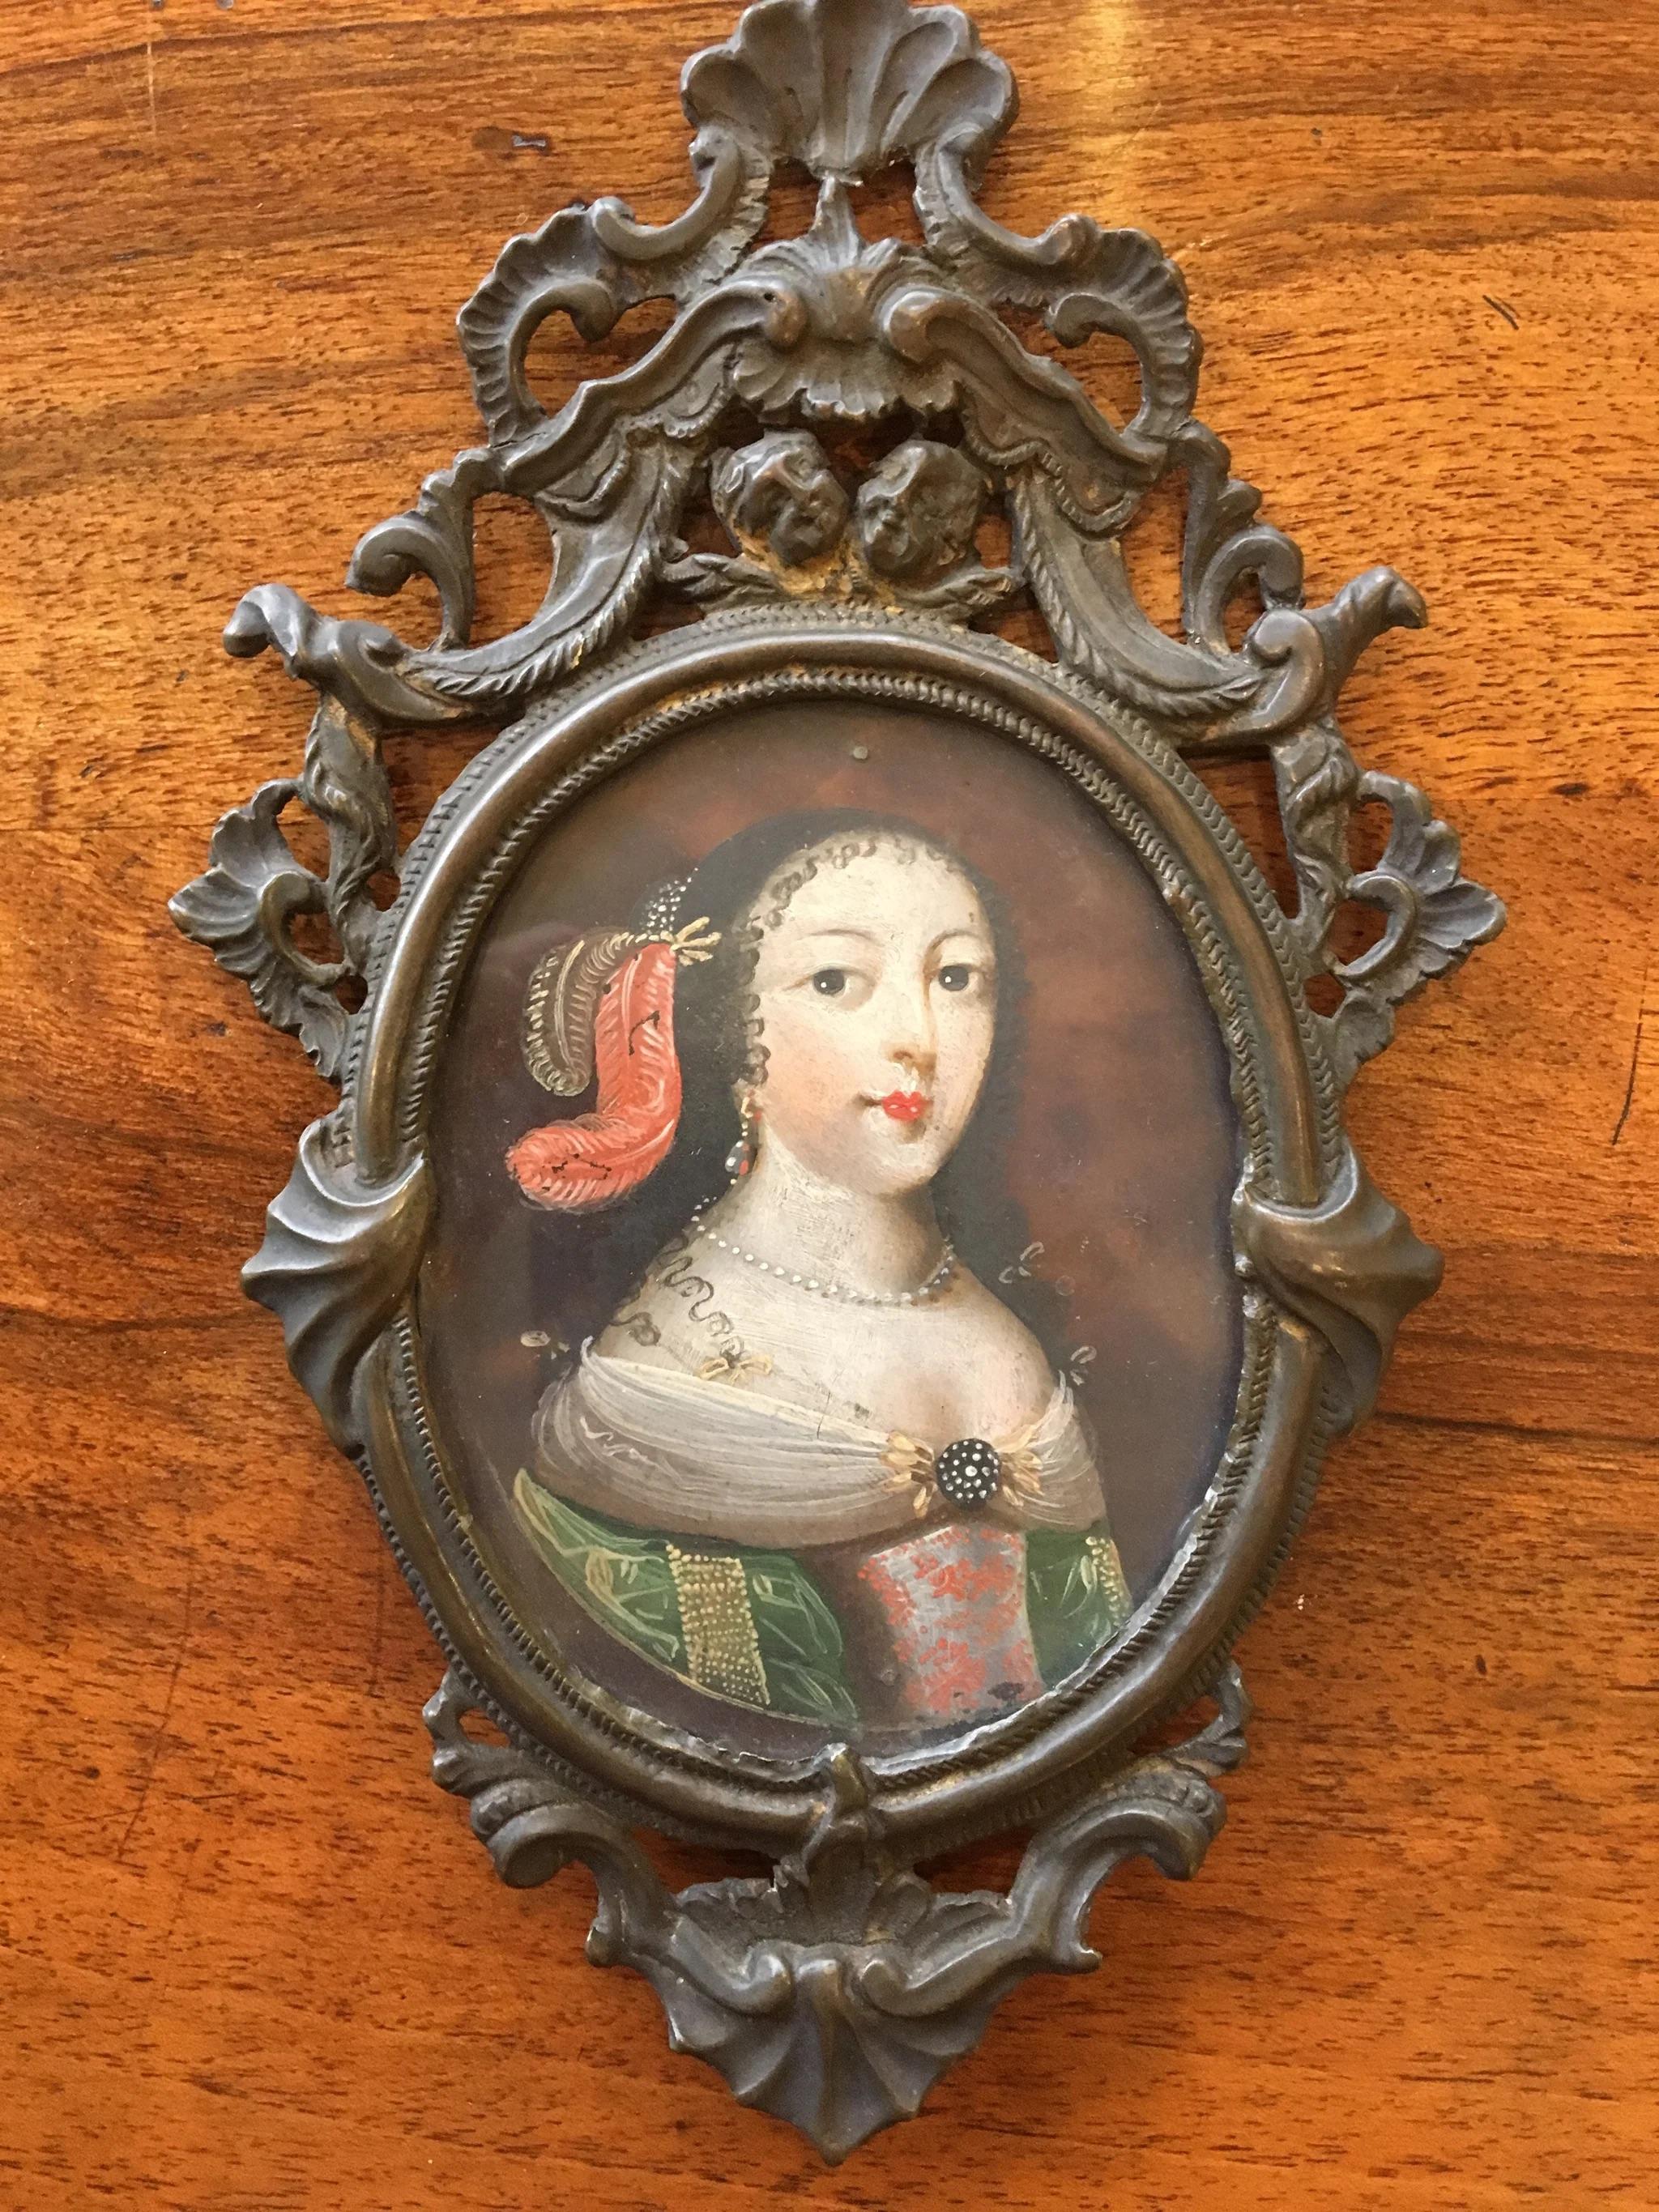 Oval portrait Miniature on tortoiseshell of a noblewoman, probably Spanish, 17th-early 18th century. In original beautiful bronze moulded frame. Image size: 3 3/4